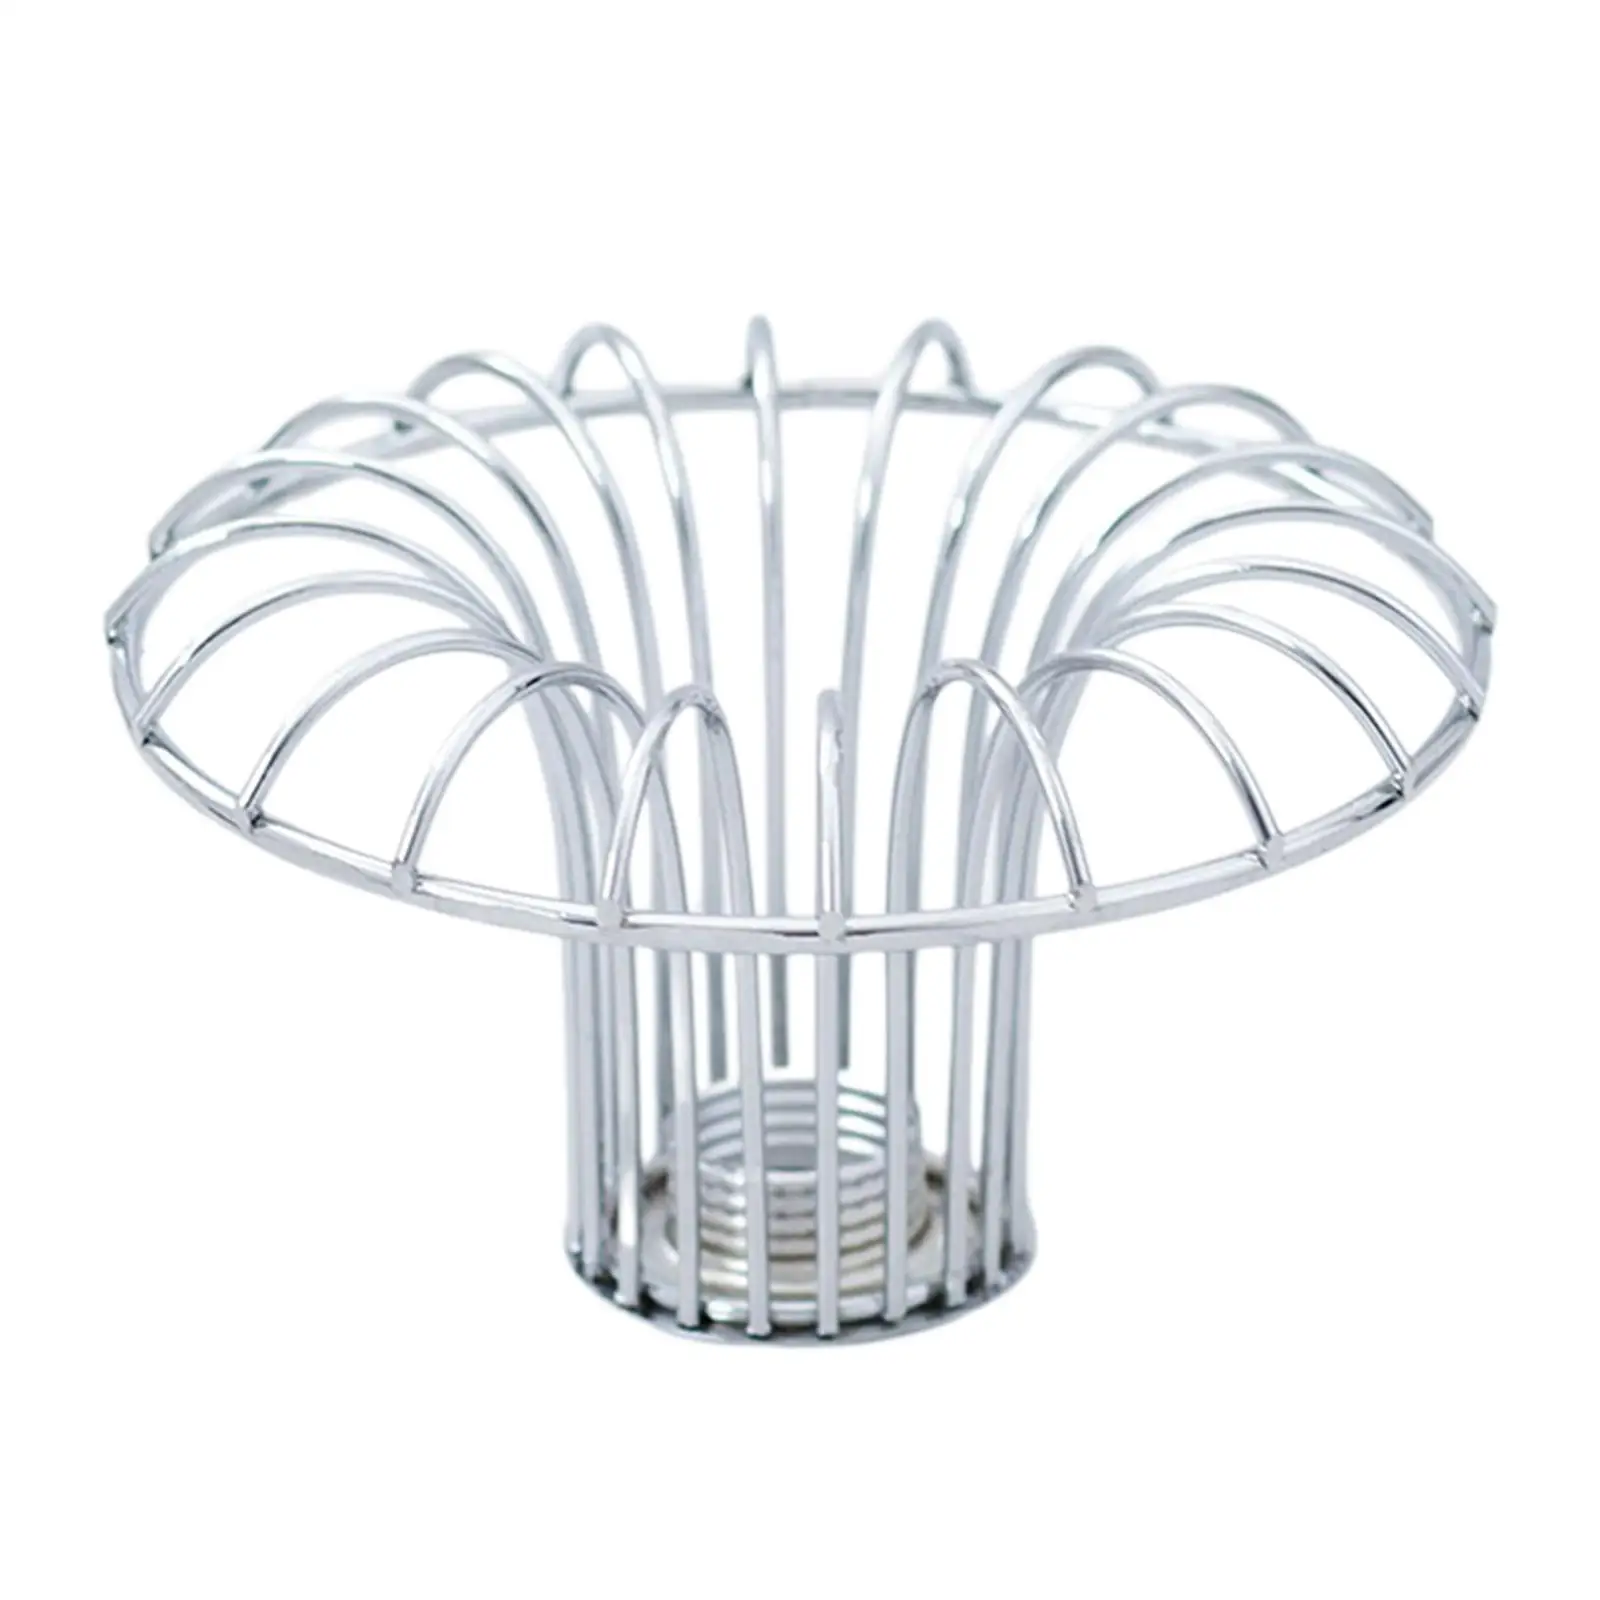 Metal Lamp Shade Fitting Hanging Pendant Light Cover for Ceiling Light Fixture Lanterns